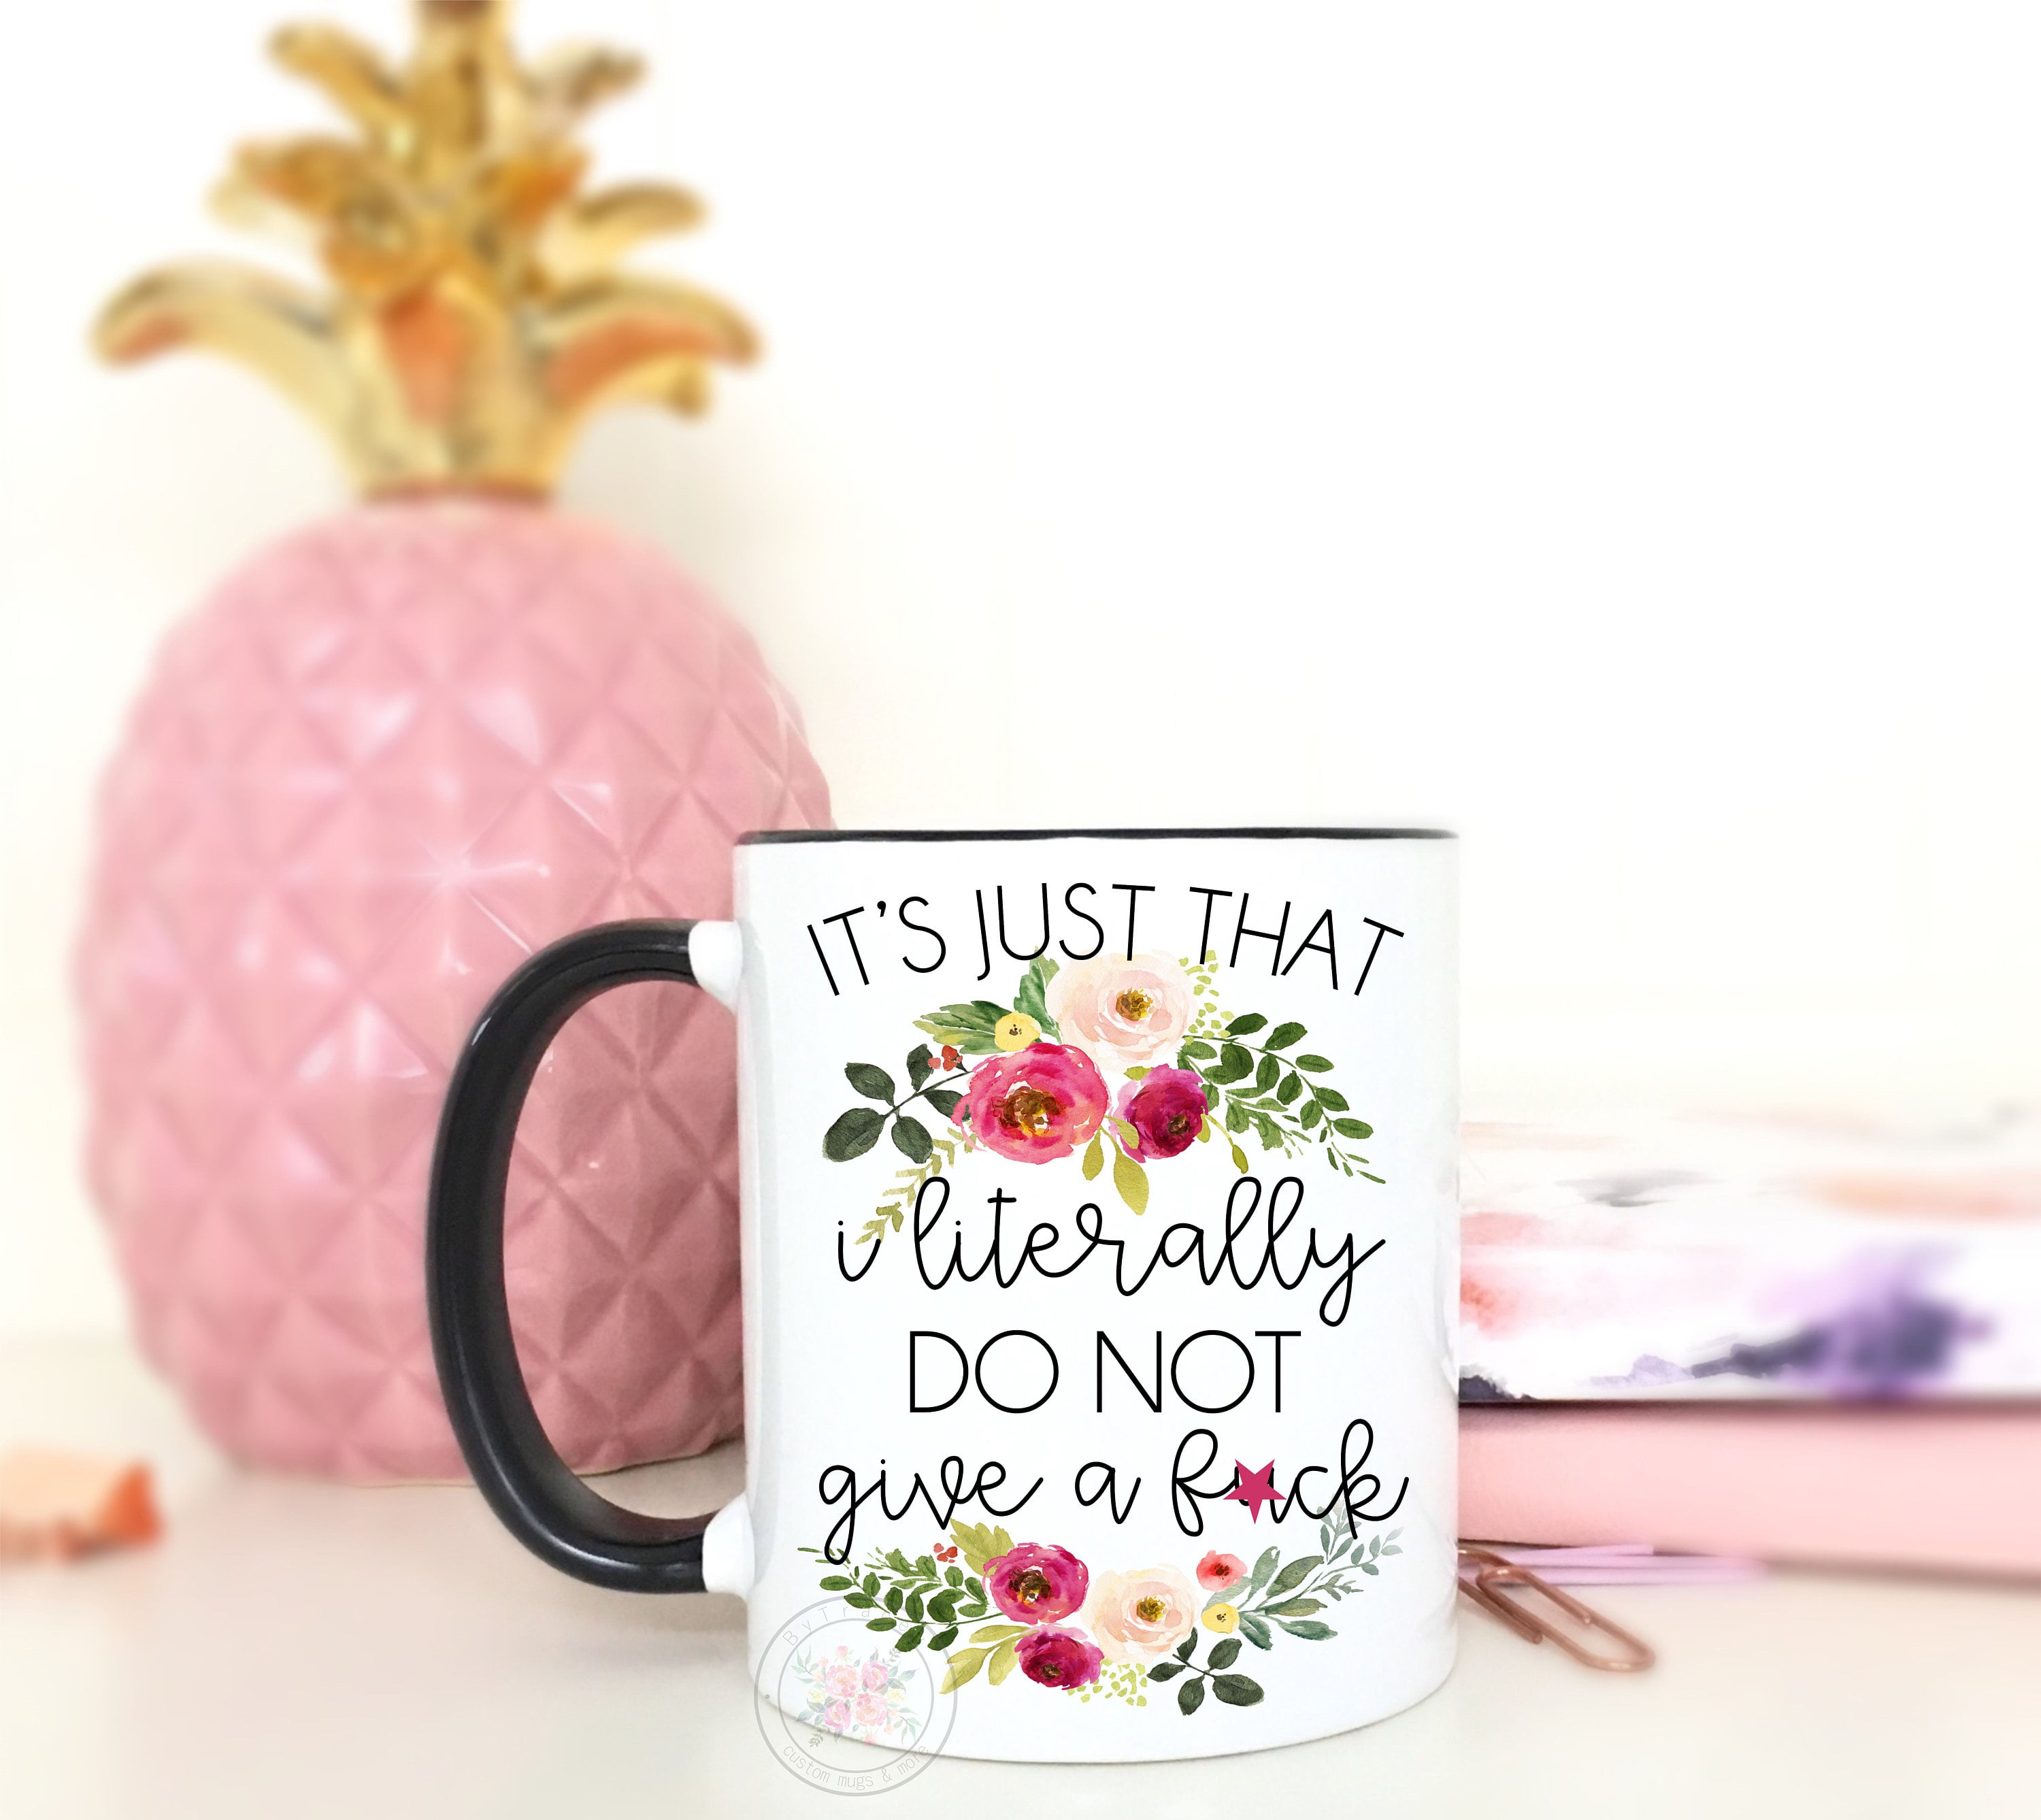 Let's Just Assume I am Right | Funny Mugs for Women | Sassy Humor Mug |  Large Coffee Cups Mugs | Co-worker Gift | Work Friend | Office Mug